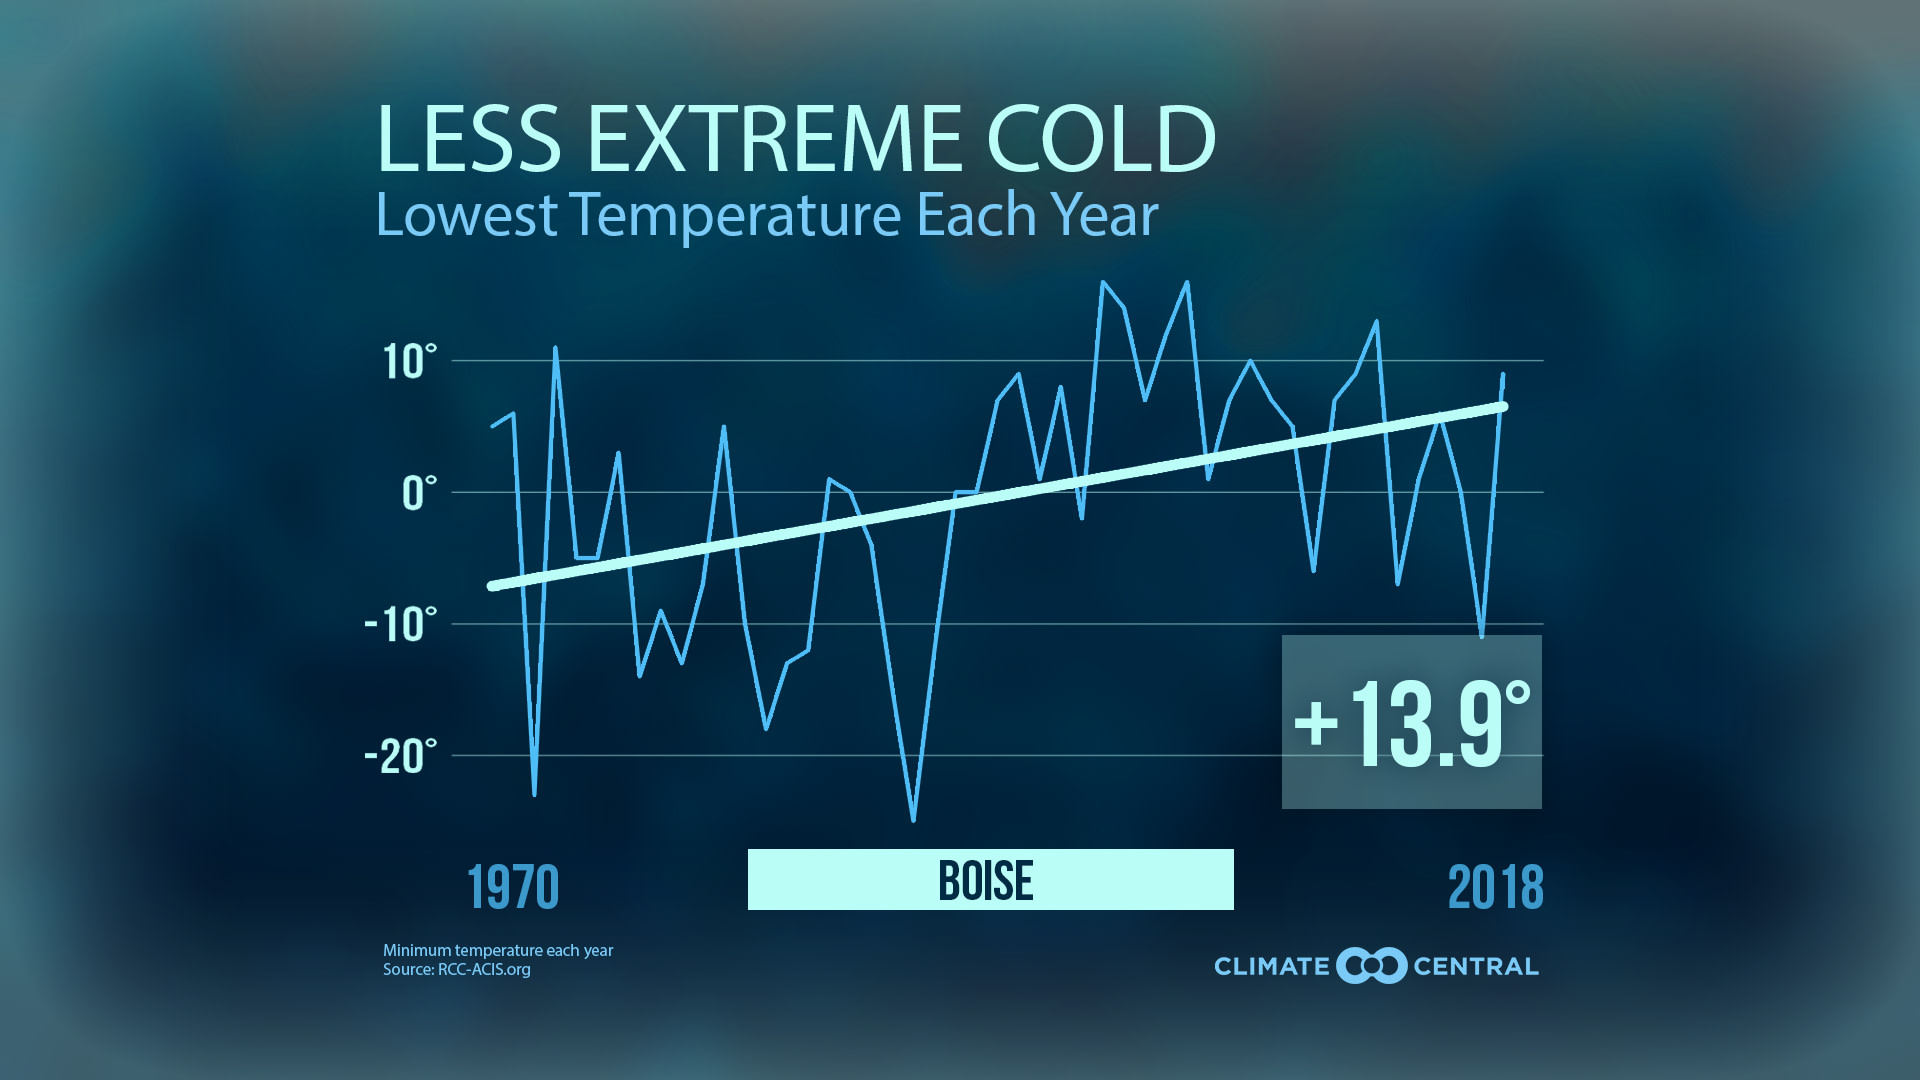 Not-So-Extreme Cold